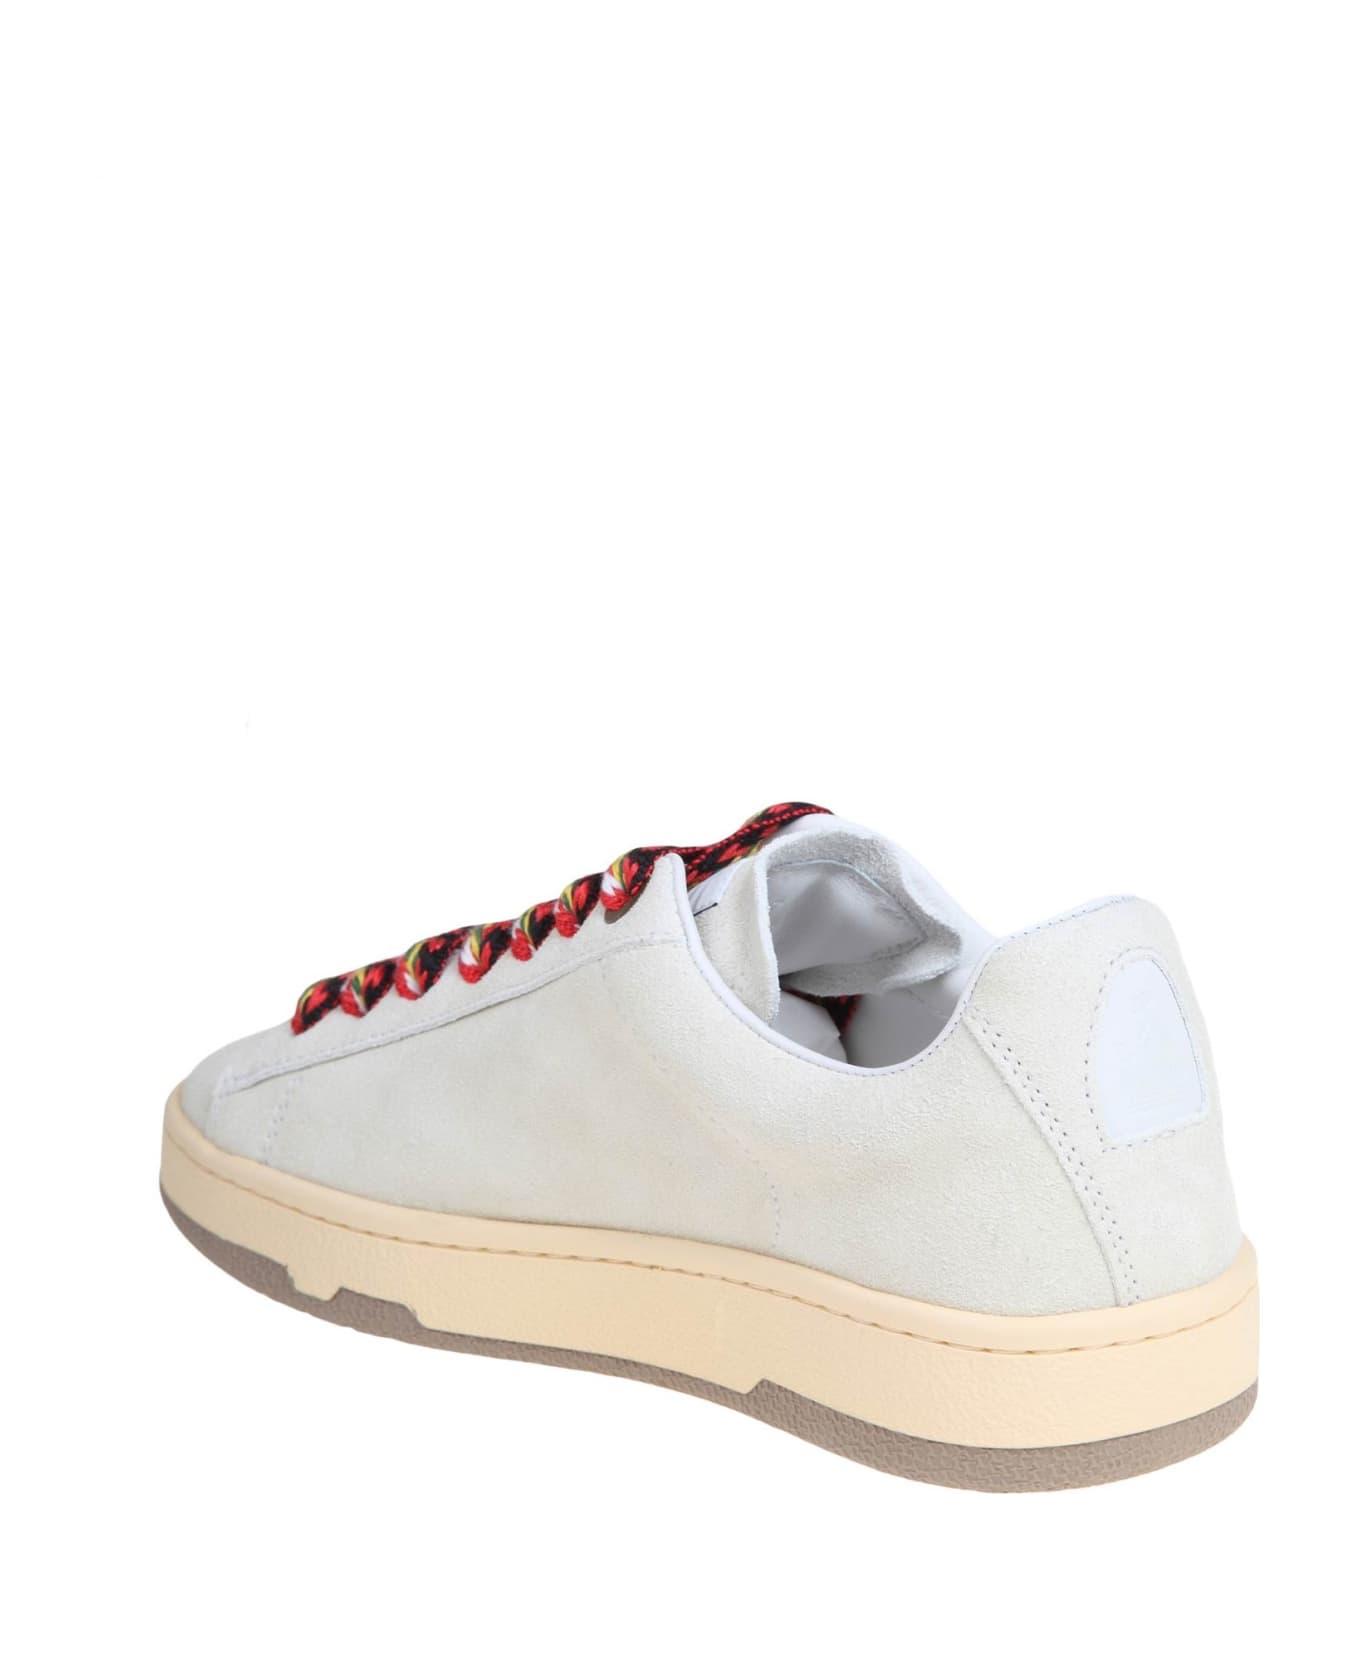 Lanvin Lite Curb Sneakers In Leather Color White - White